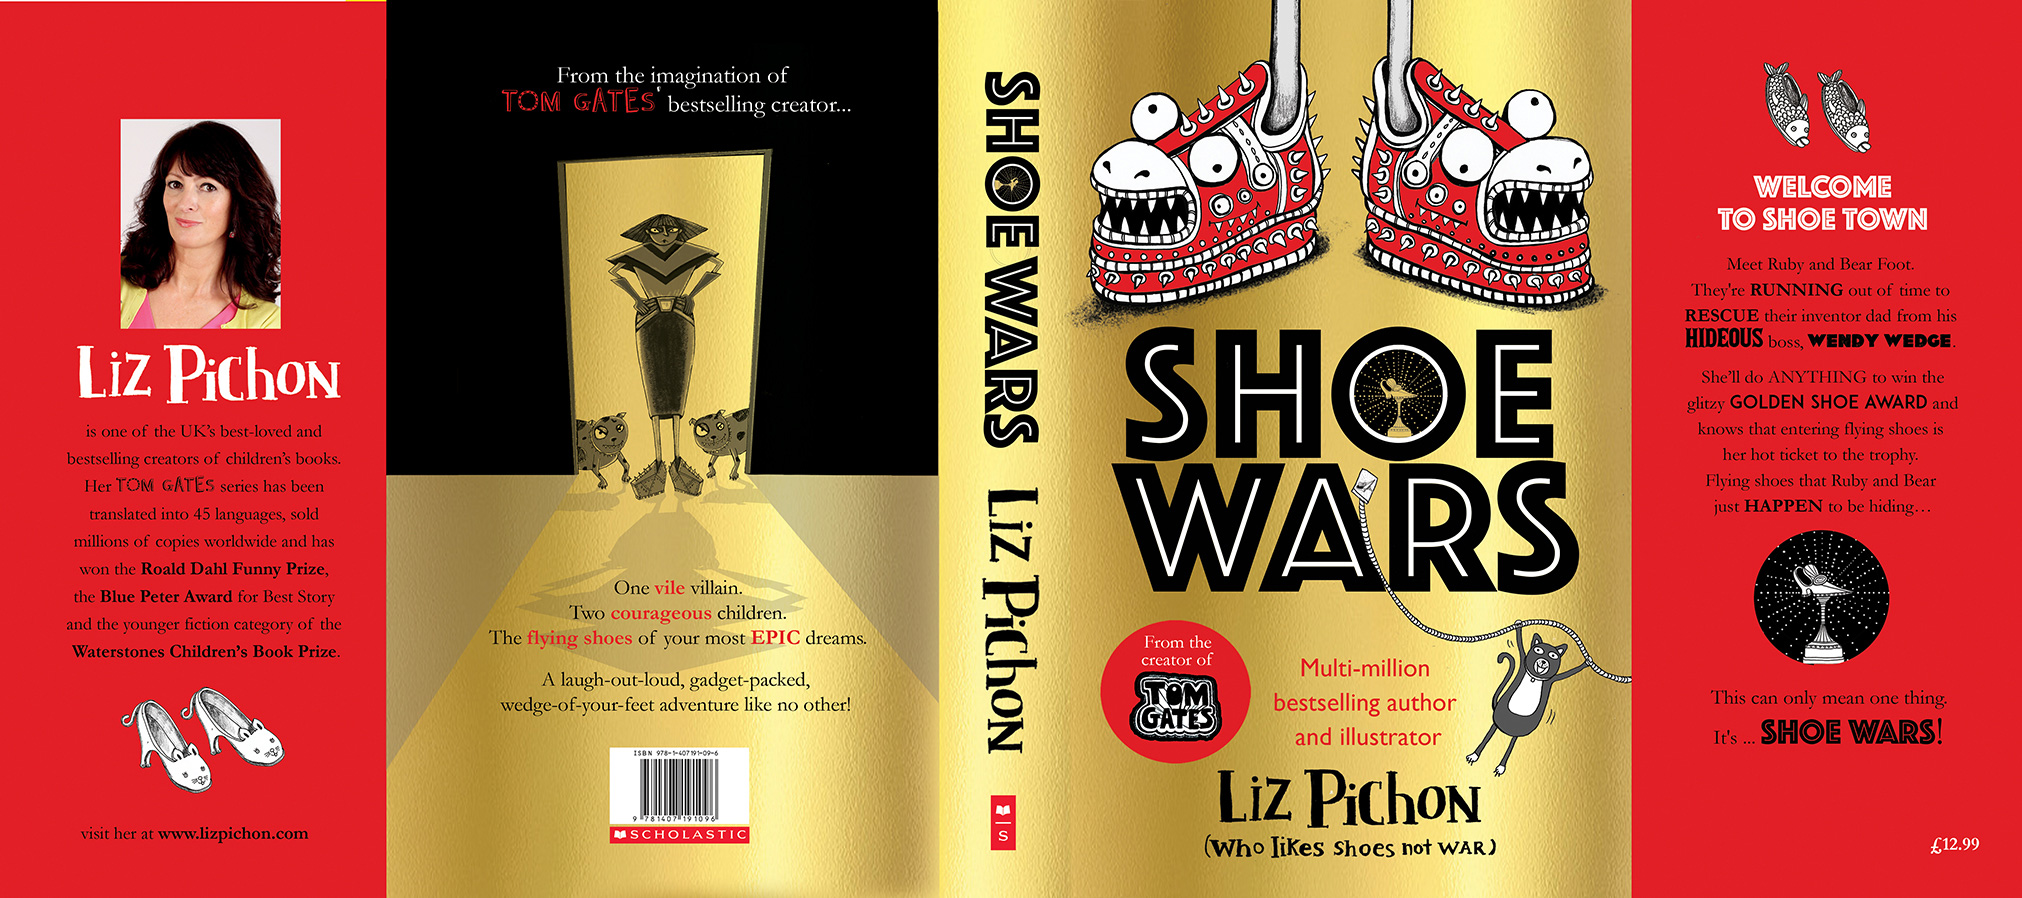 Shoe Wars! An exciting new story from Liz. 